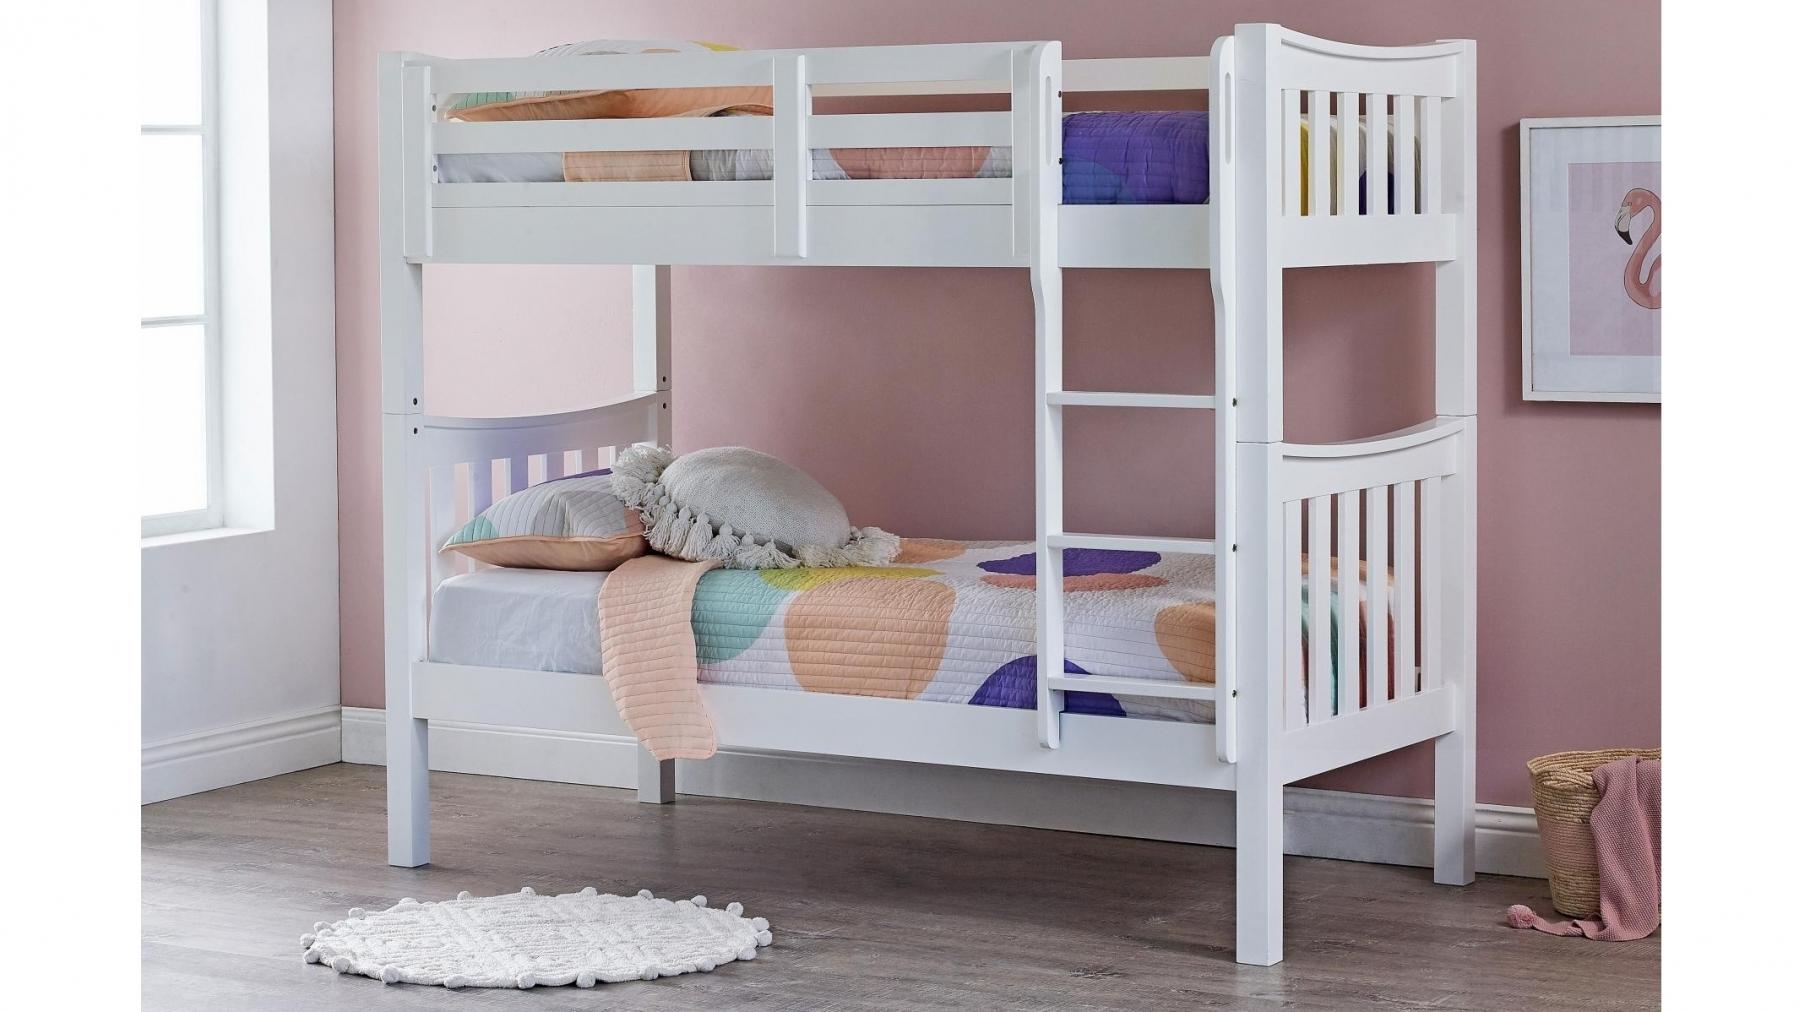 Melody Ii King Single Bunk Bed, The Bunk Bed King